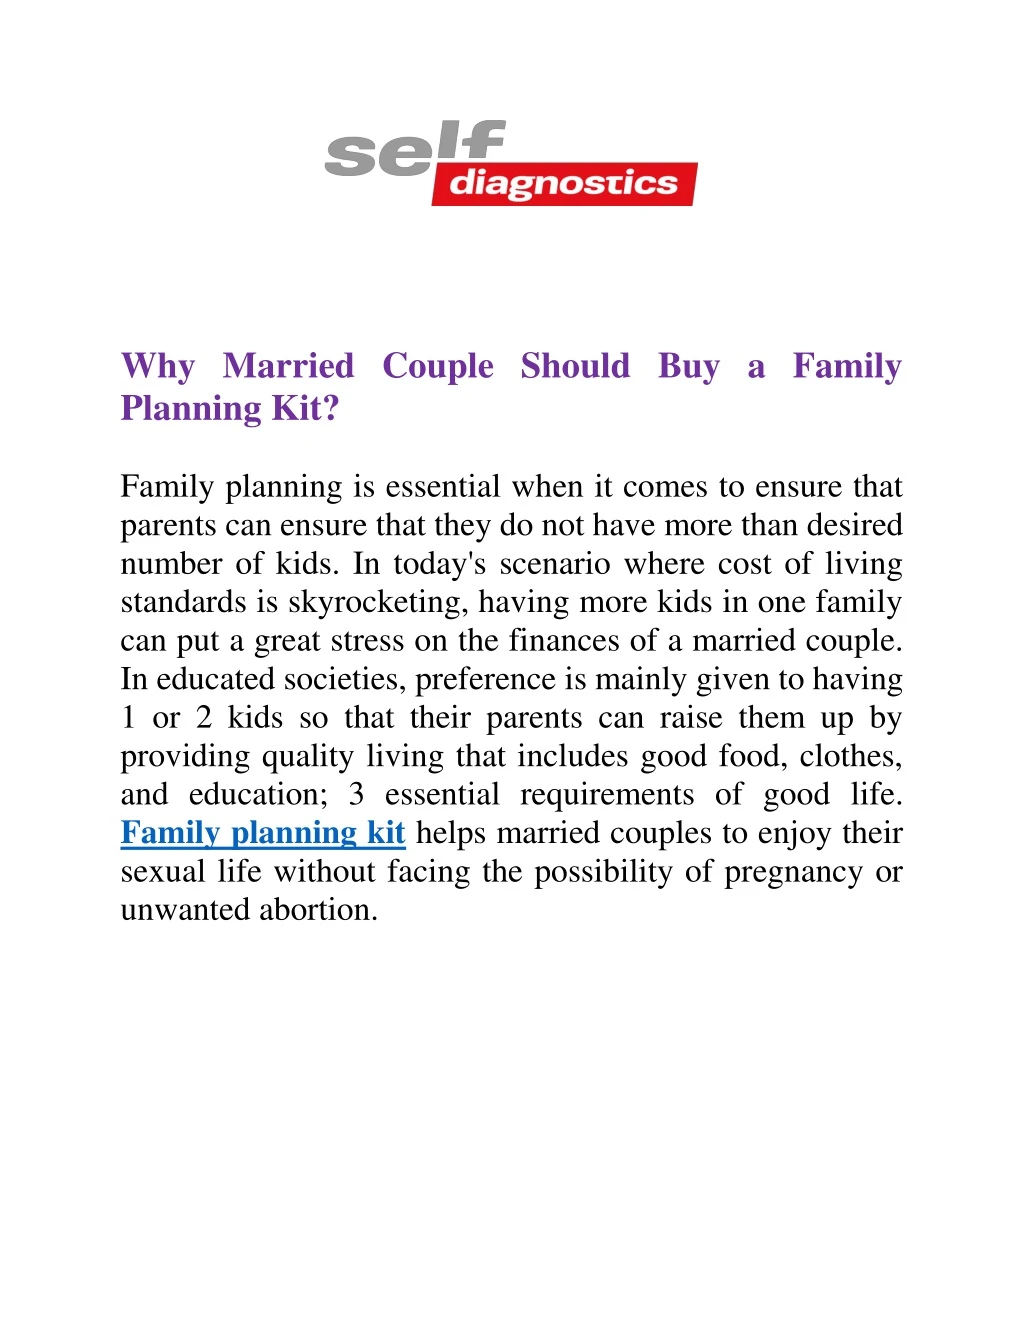 why married couple should buy a family planning